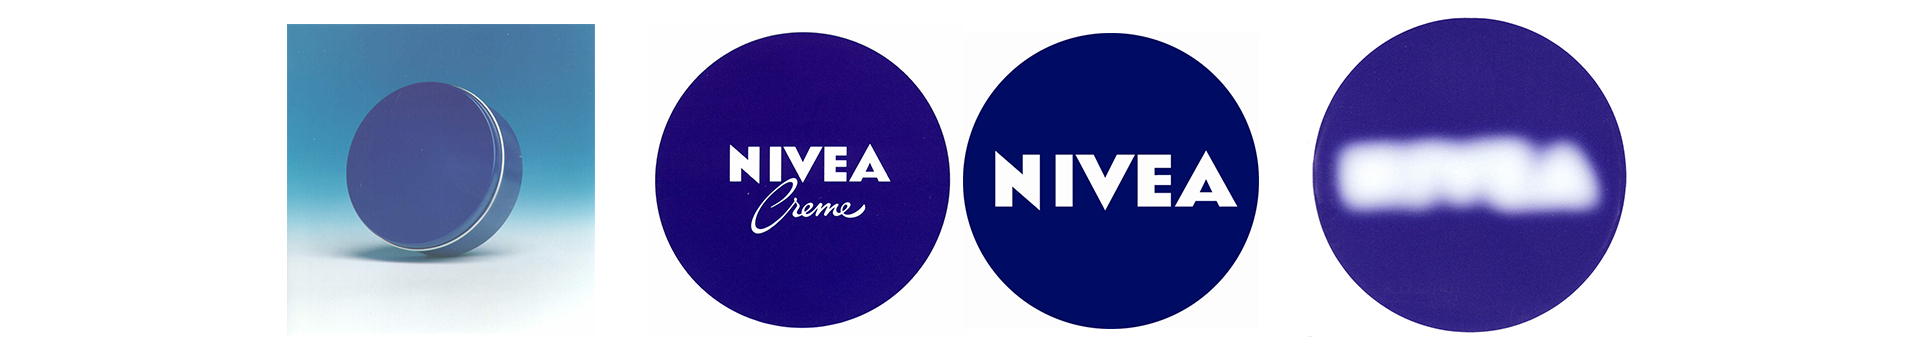 jas Beheer plotseling Nothing for Nivea - Chiever